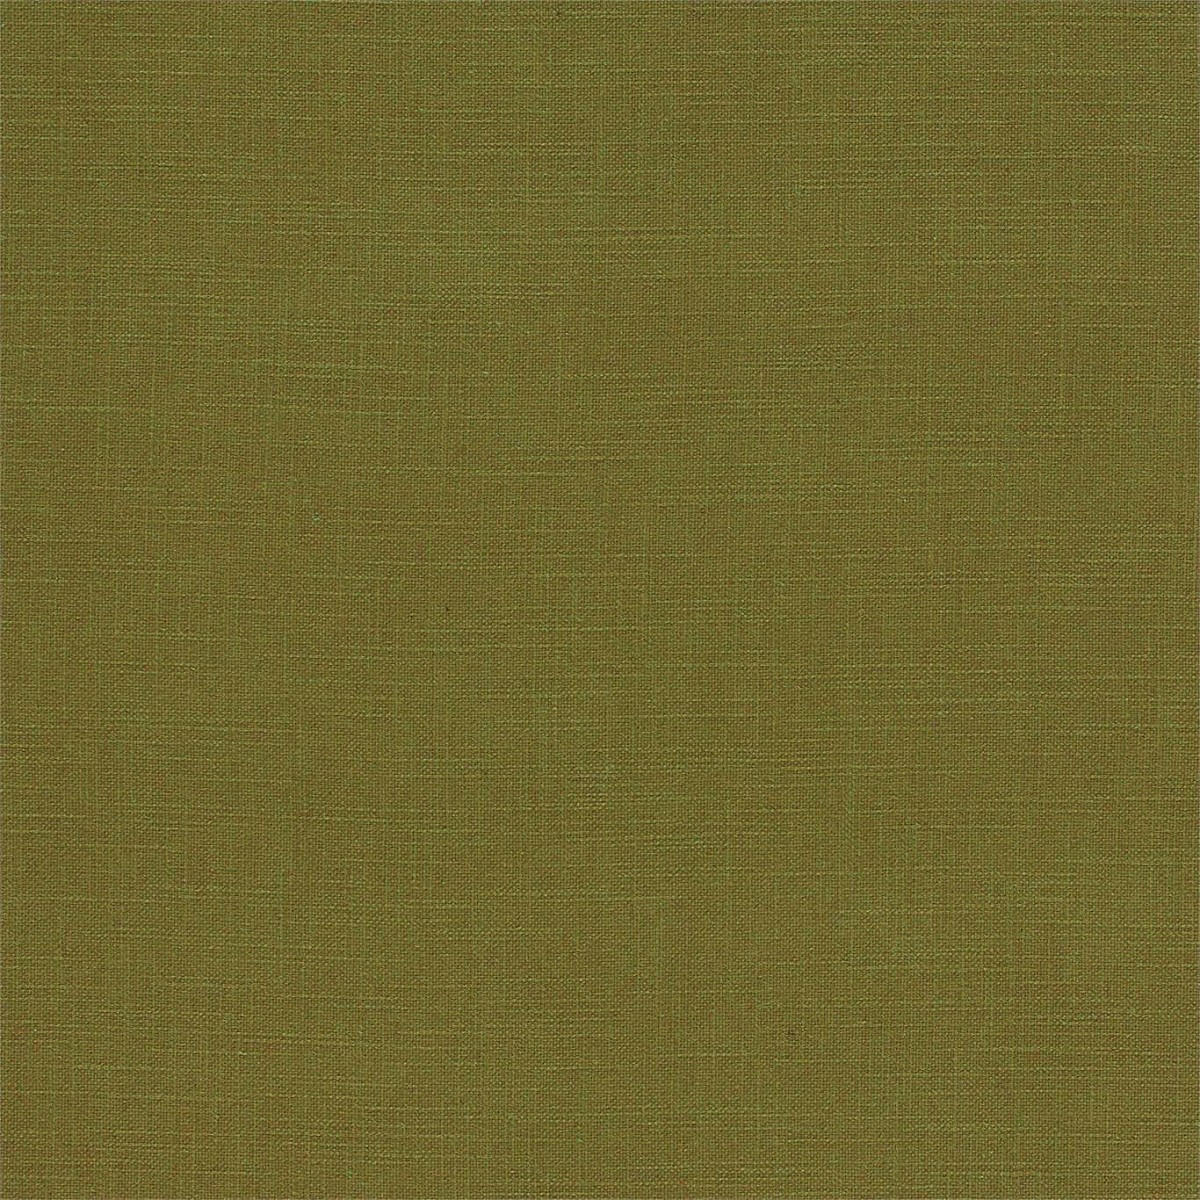 Tuscany Ii Olive Fabric by Sanderson